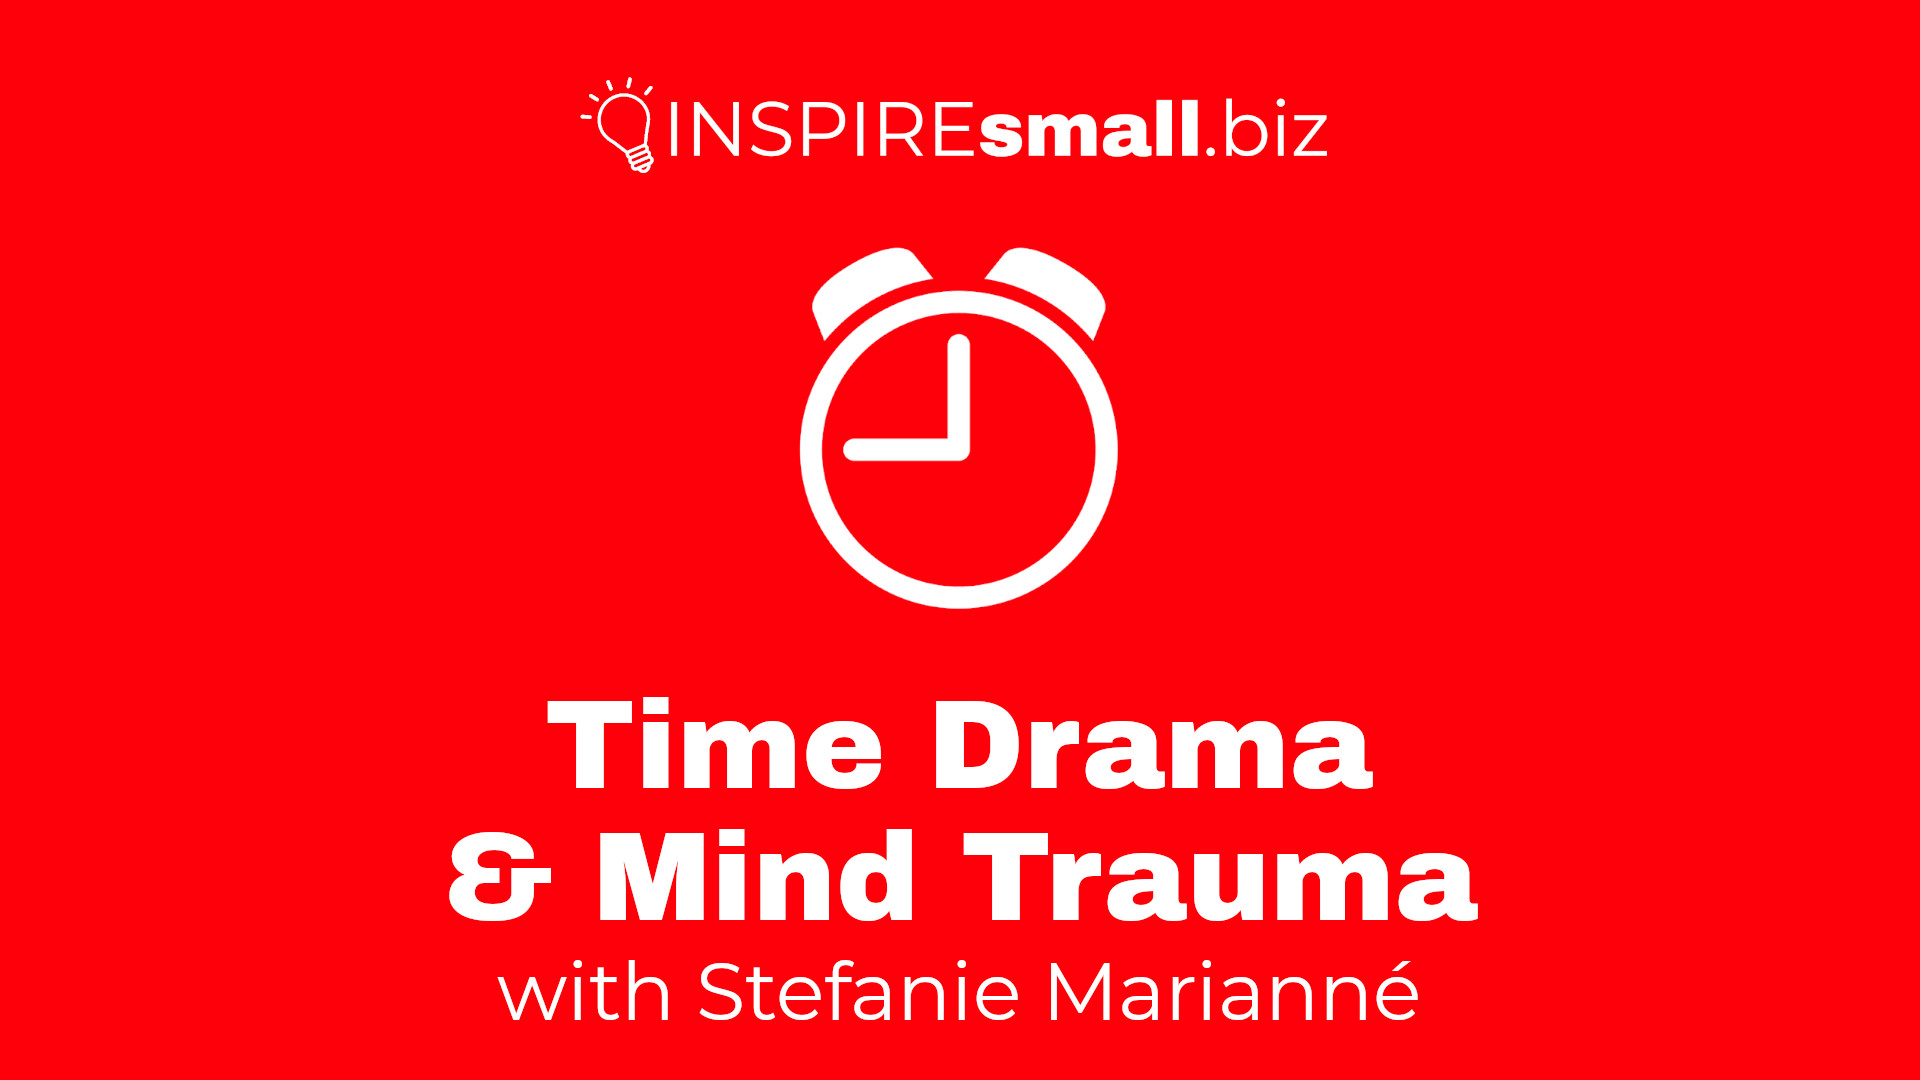 Image of a clock over a red background with the text 'time drama and mind trauma' a presentation from Stefanie Marianné on INSPIREsmall.biz